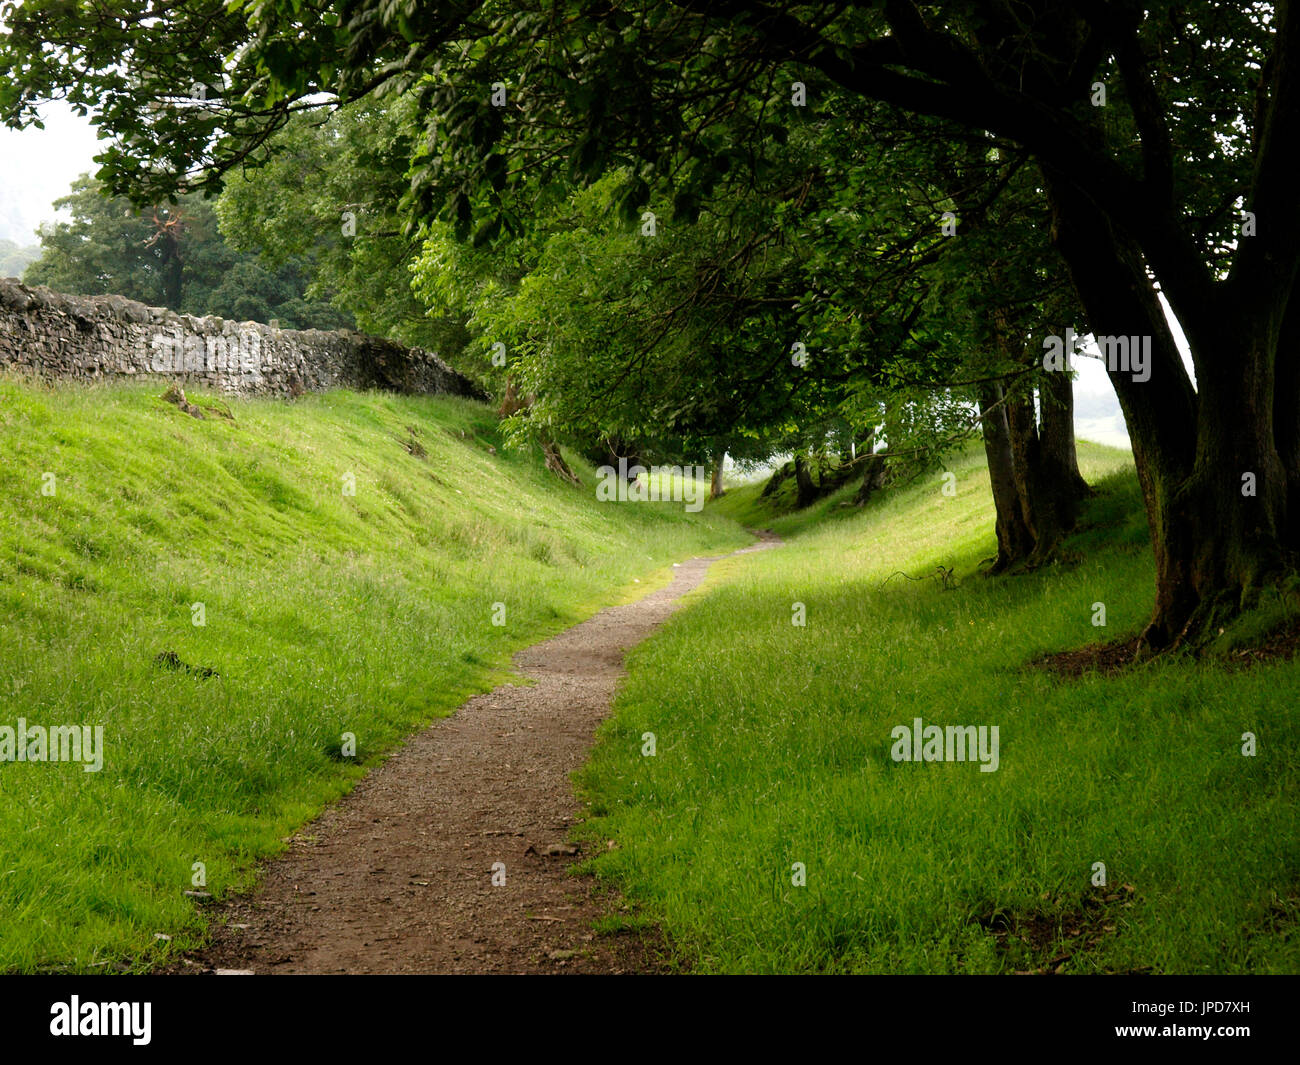 Tree lined path, Coniston, The Lake District, Cumbria, UK Stock Photo